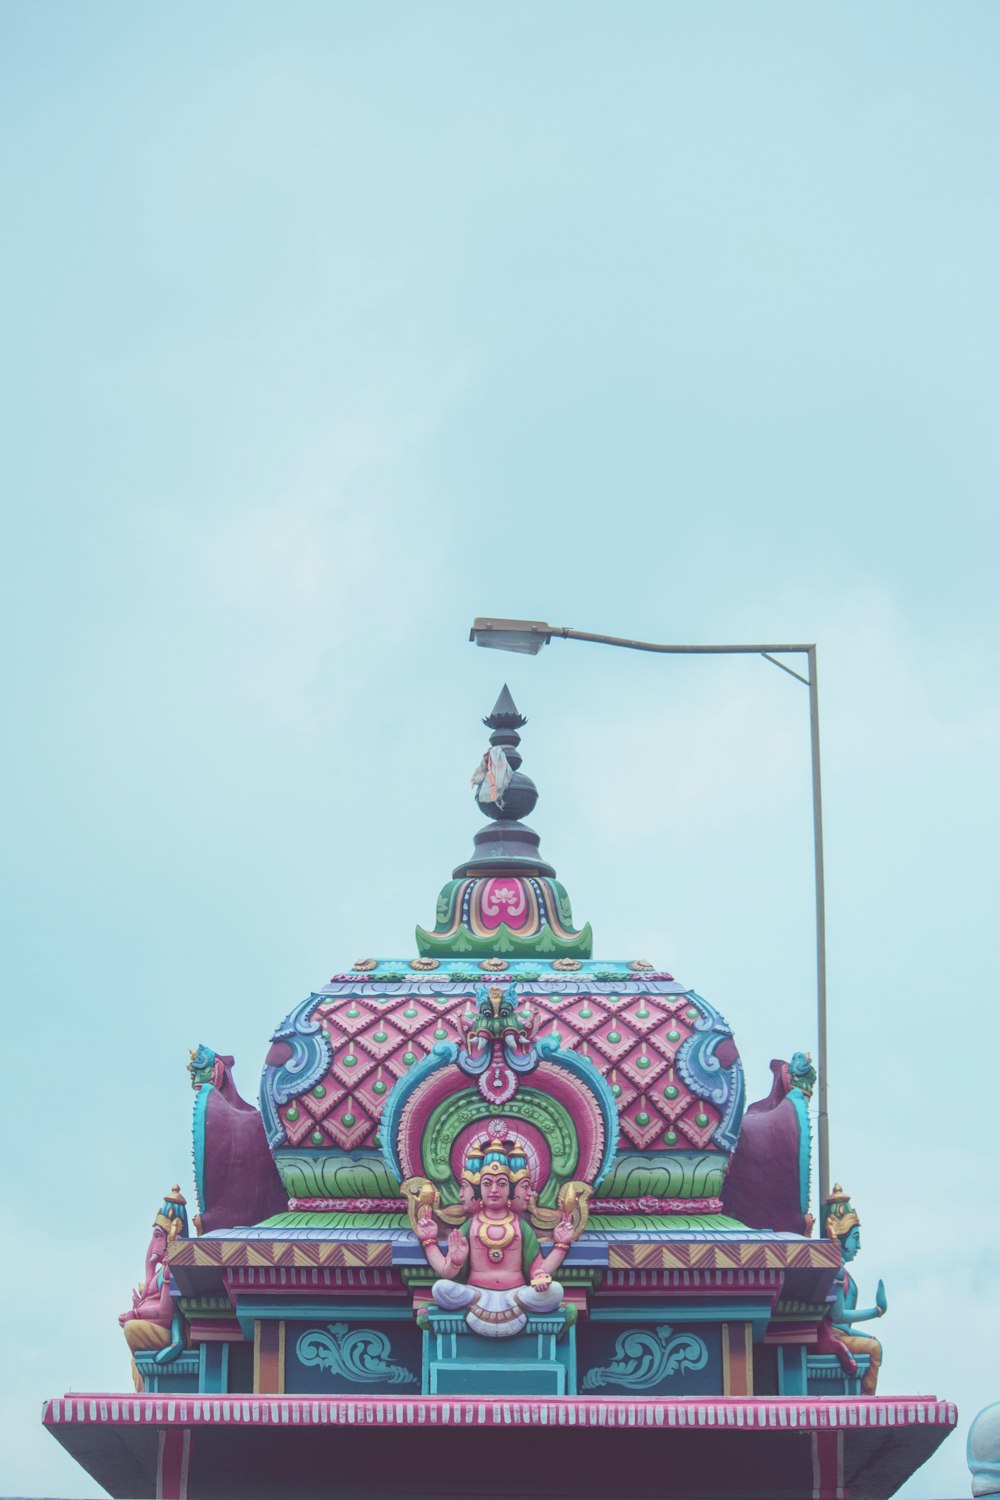 a colorfully decorated building with a street light on top of it